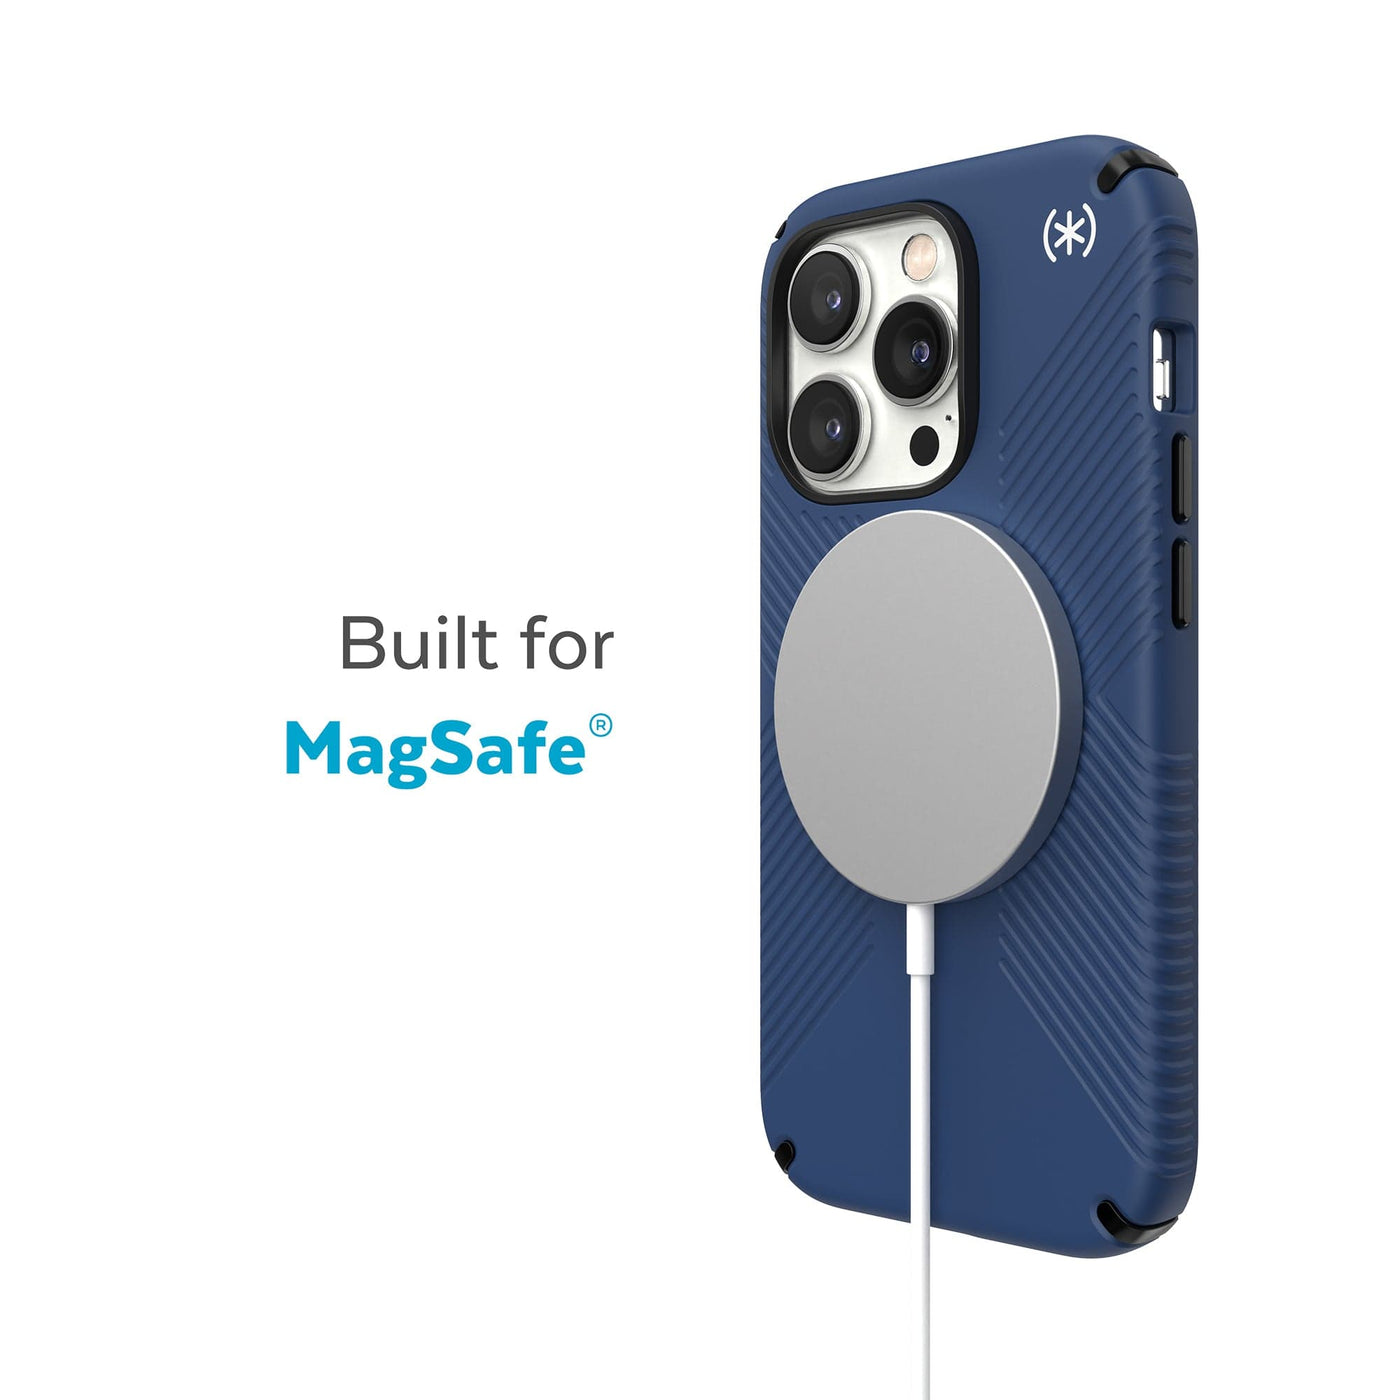 Speck Presidio Ultra iPhone XR Cases Best iPhone XR - $49.99